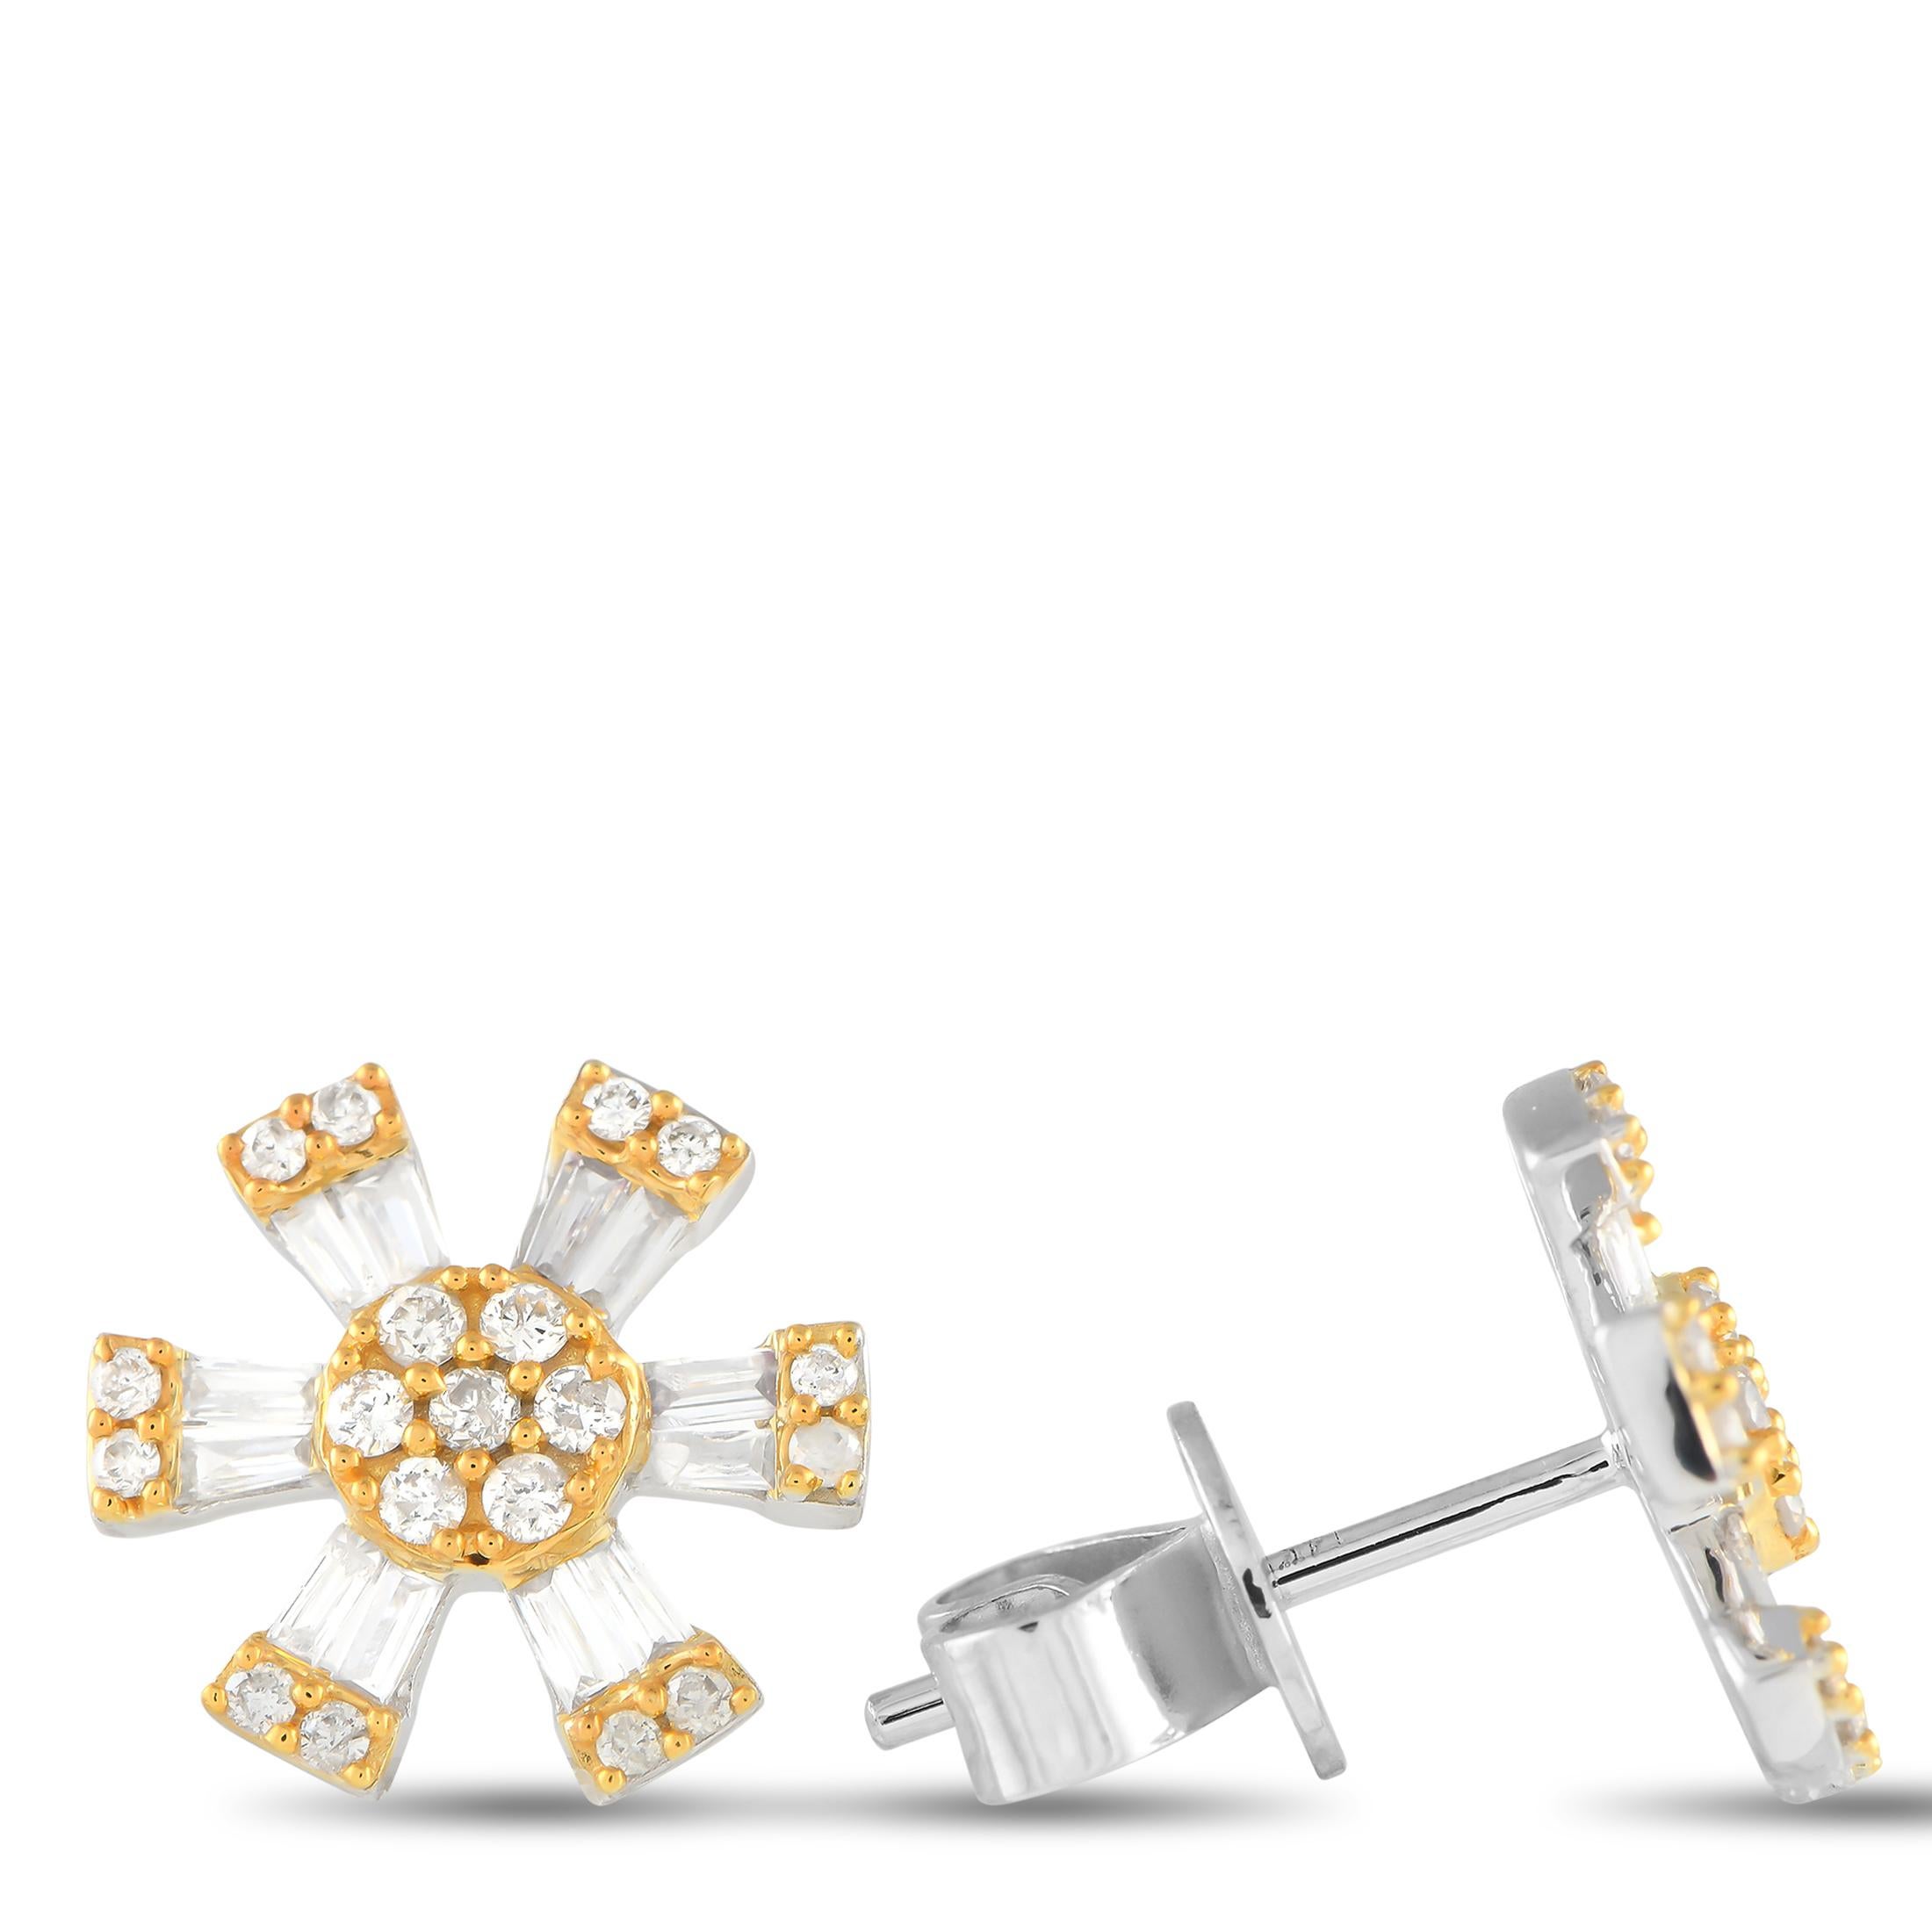 Give your basic outfits an elegant spin by wearing this pair of pinwheel studs. These LB Exclusive earrings feature a cluster of round diamonds on a yellow gold disc. Stemming from the central disc are step-cut diamonds that form a petal-like or